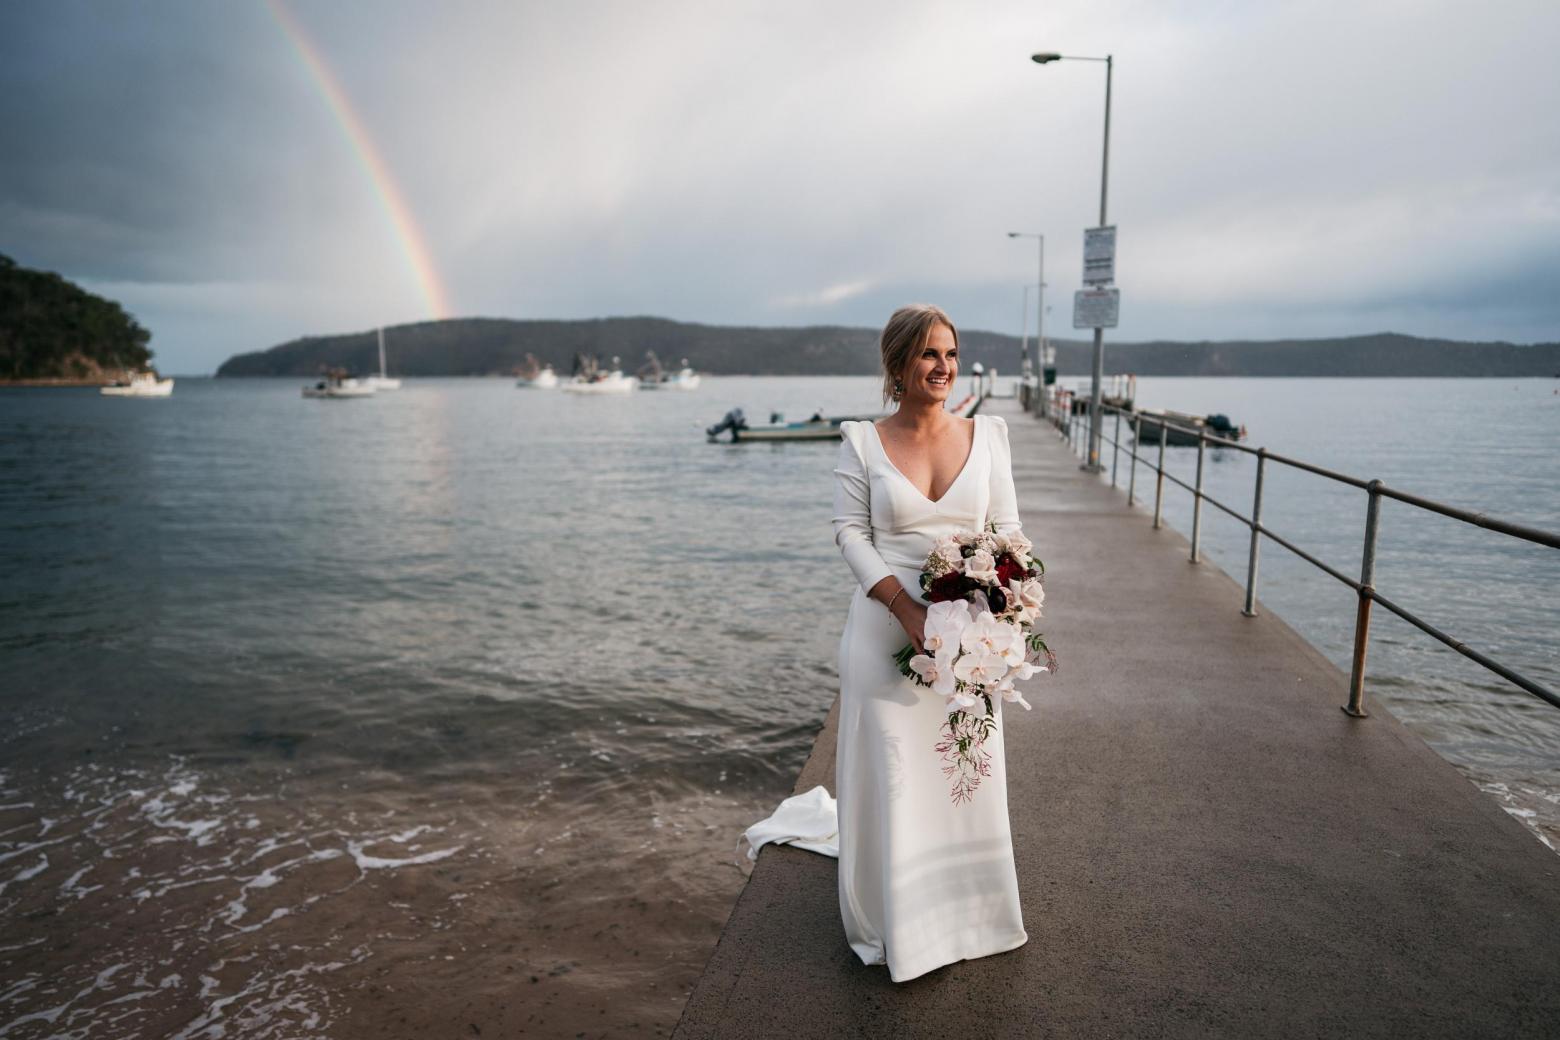 Bride Jordana under rainbow wearing the AUBREY gown by Karen Willis Holmes; featuring a V-neck and long-sleeves.